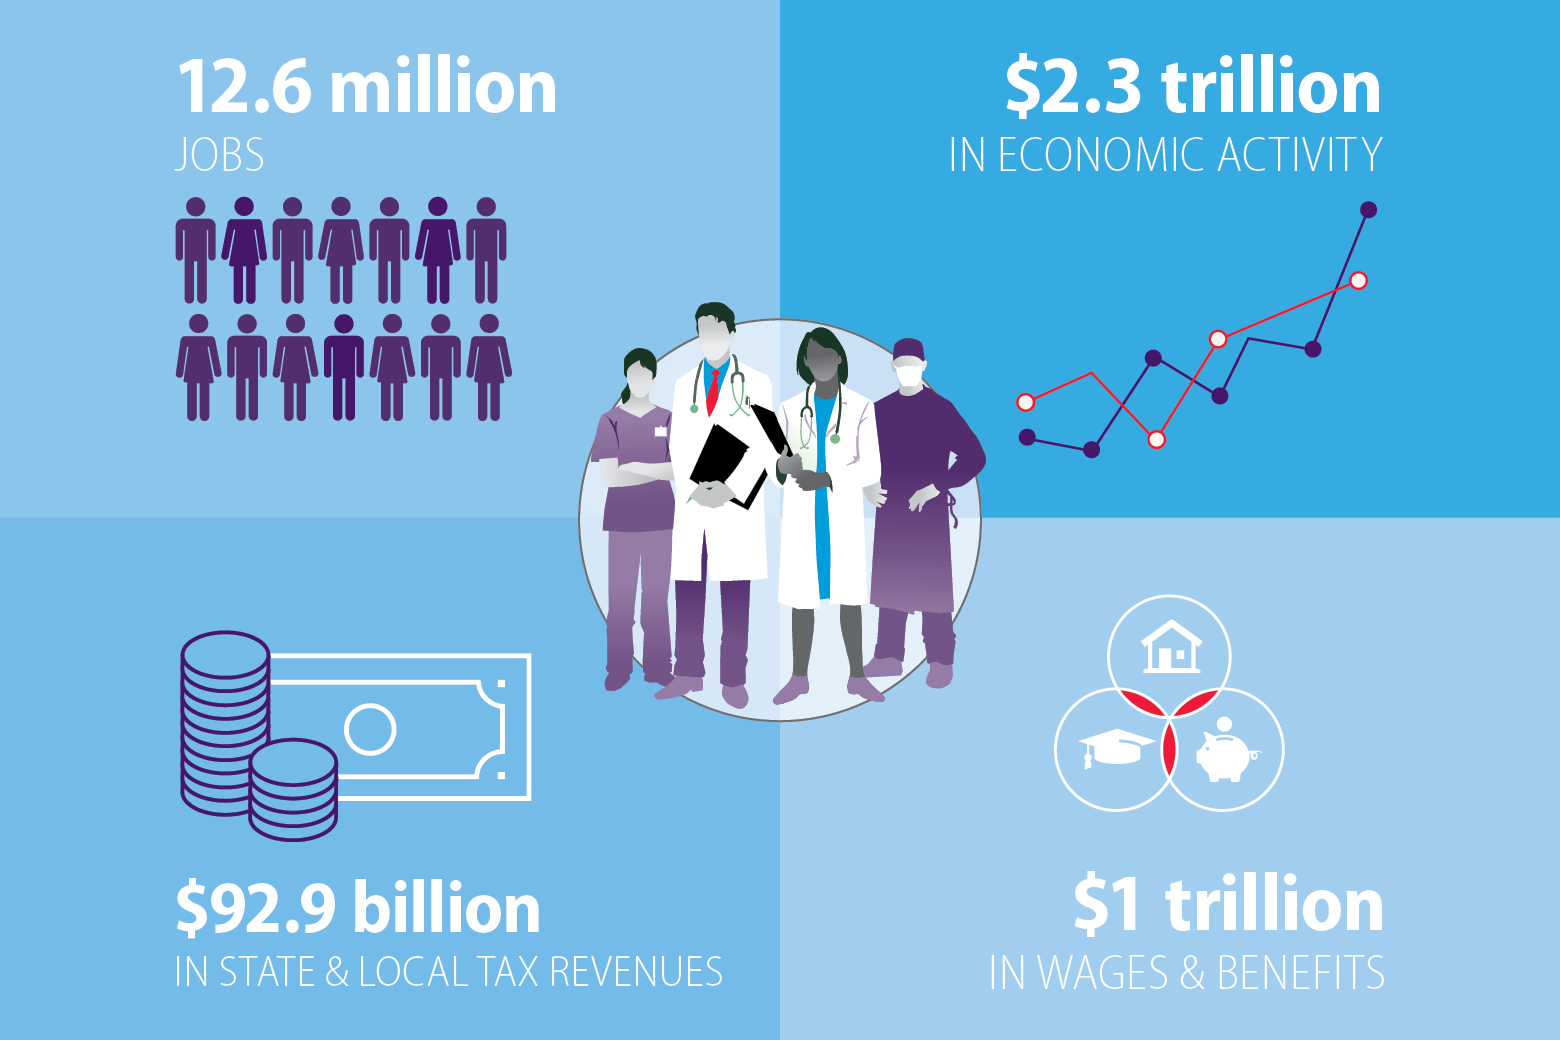 National Economic Impact of Physicians - AMA report 